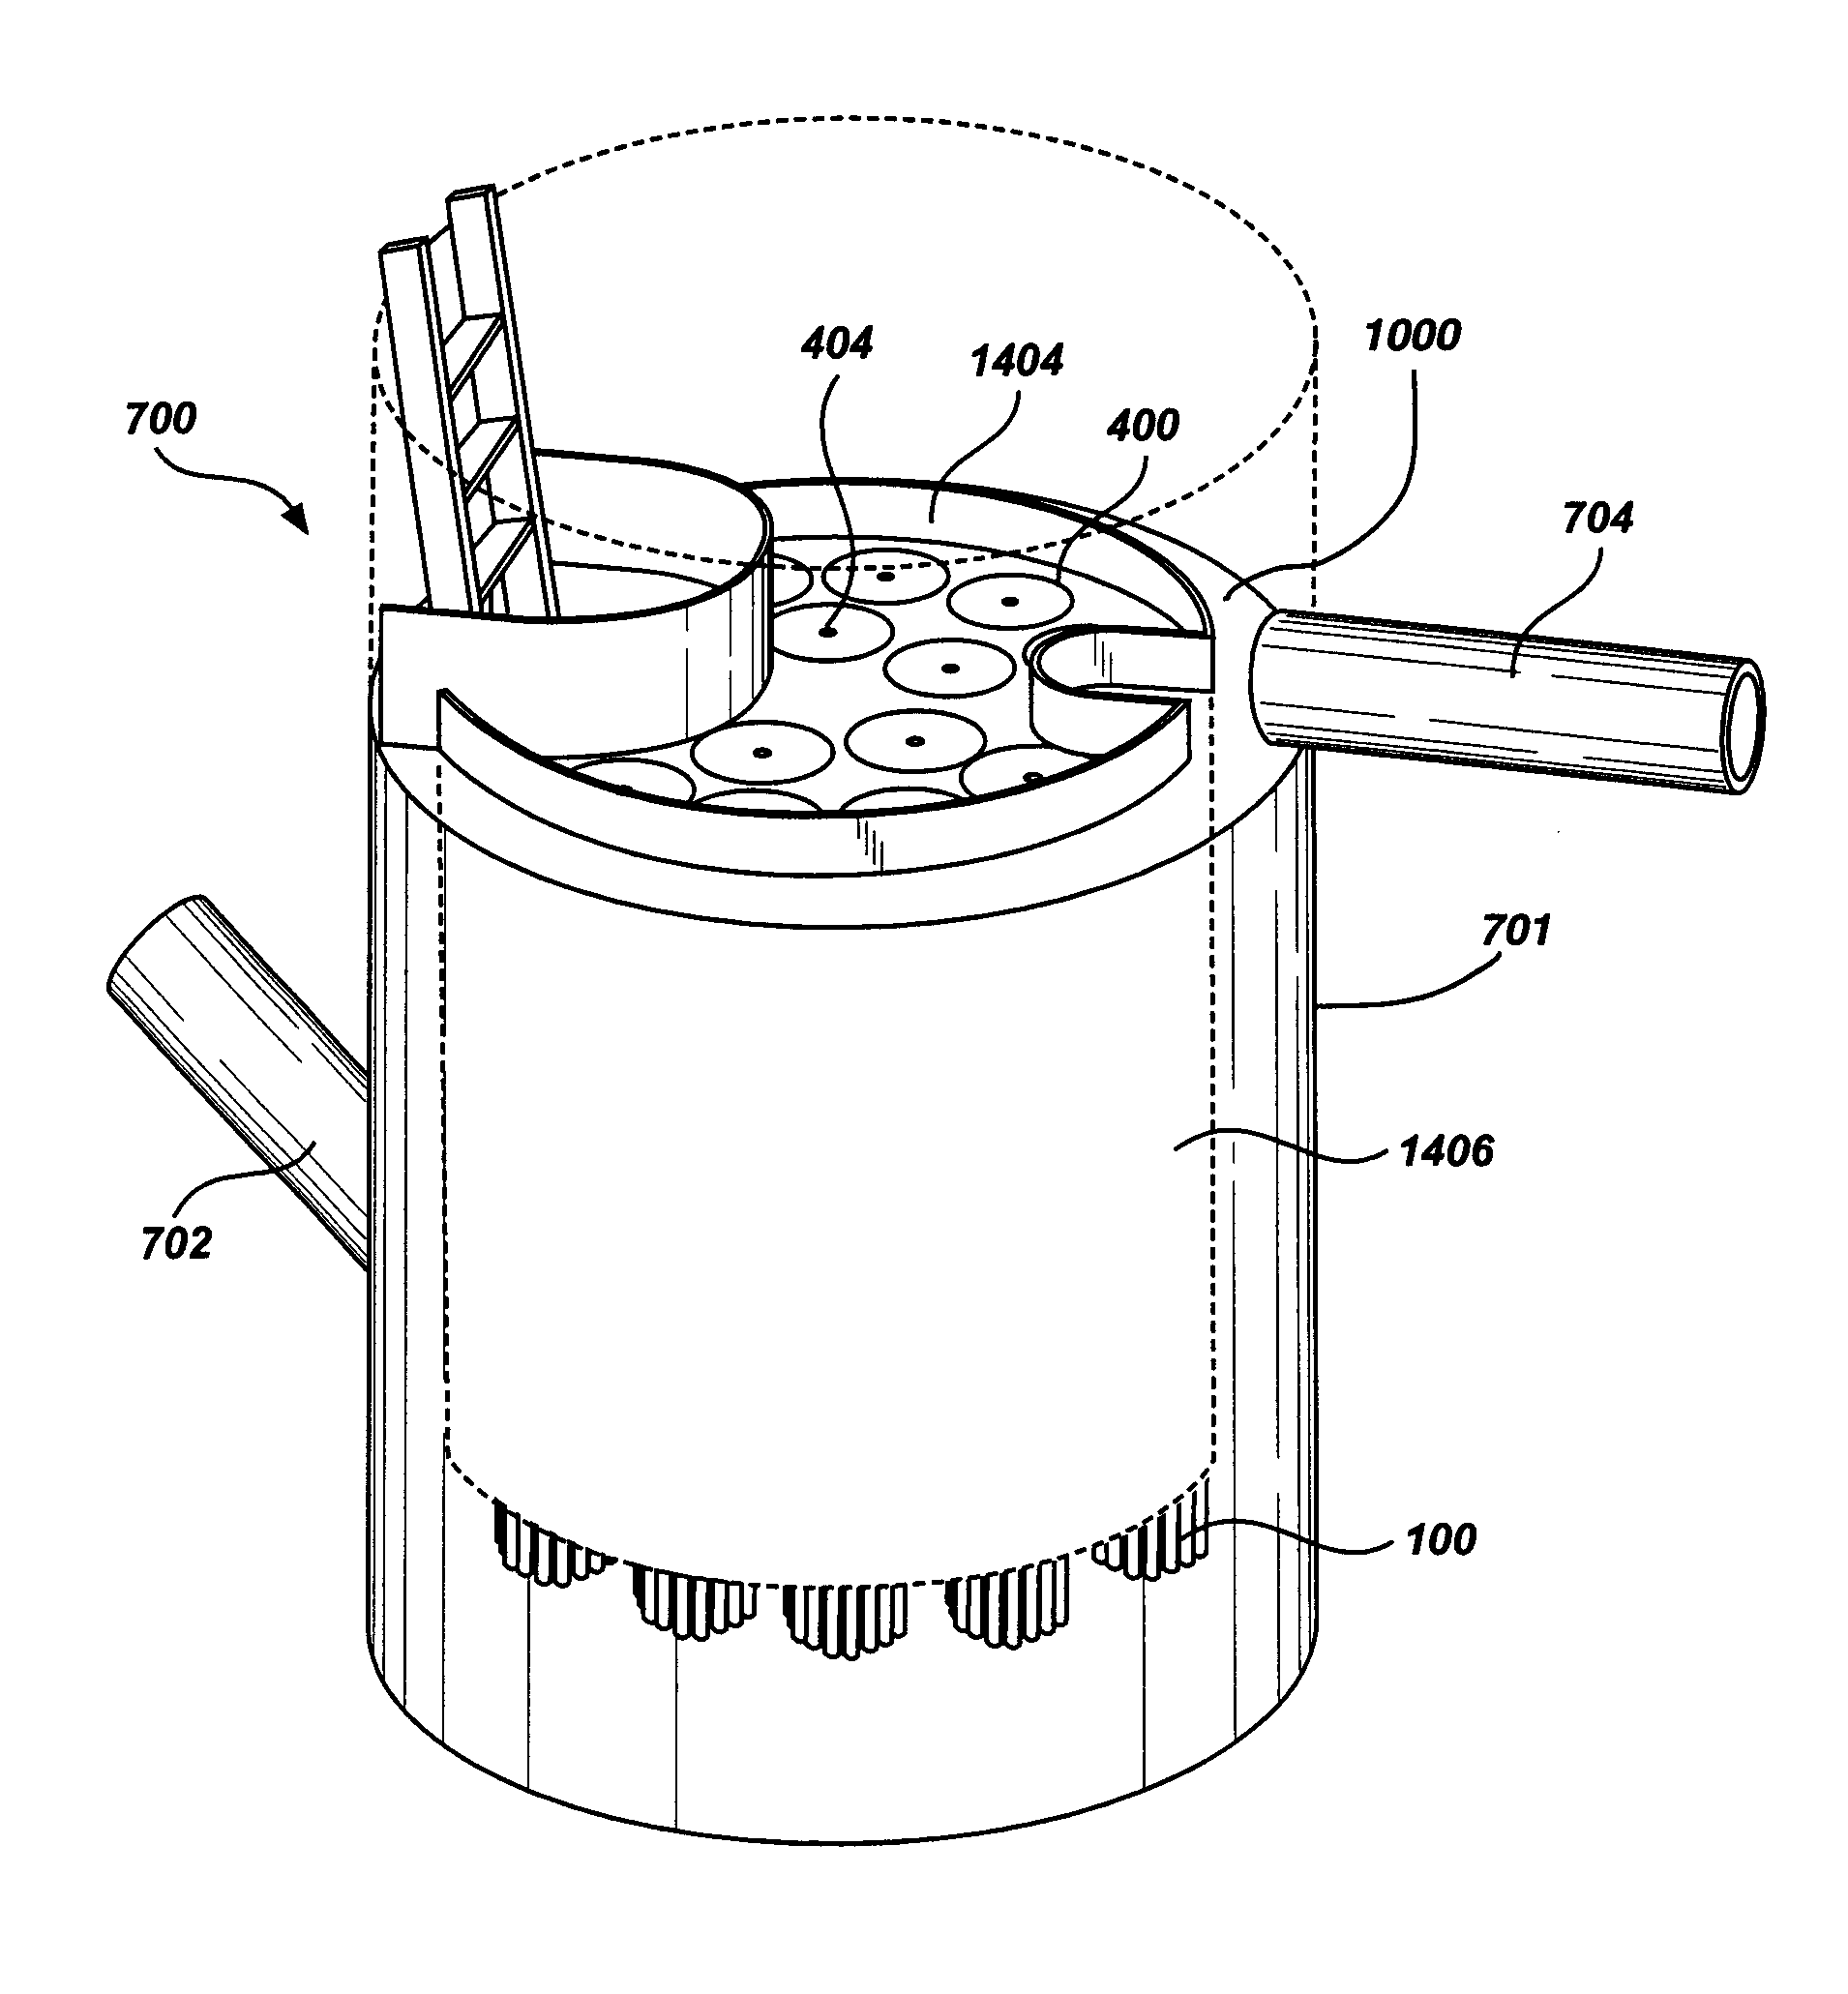 Filter for removing sediment from water